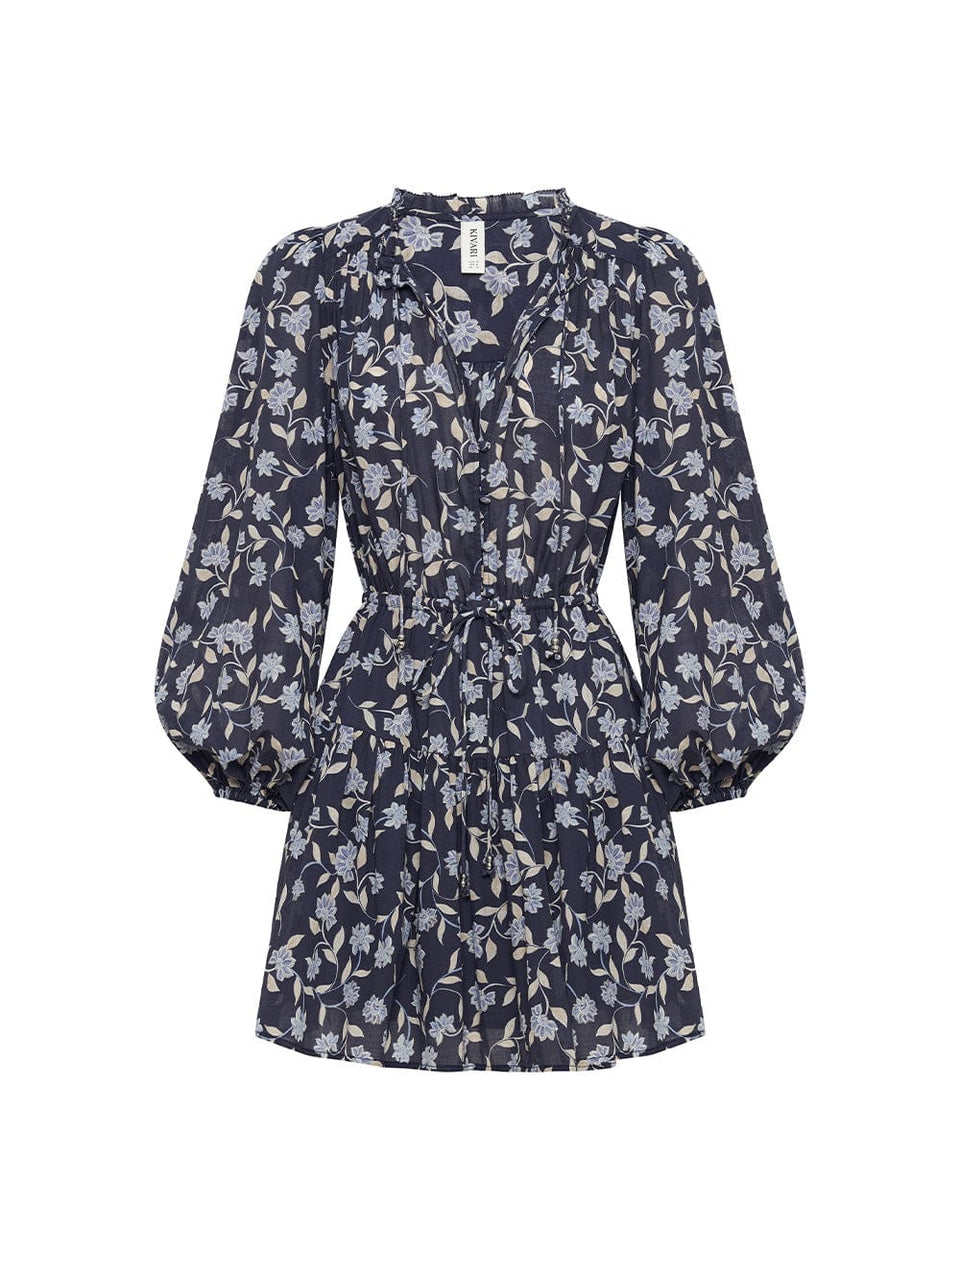 Ghost image of KIVARI Jeanne Mini Dress: A navy and sky blue floral dress made from cotton and featuring a button front, elasticated waist tie, full-length blouson sleeves and frill collar detail.